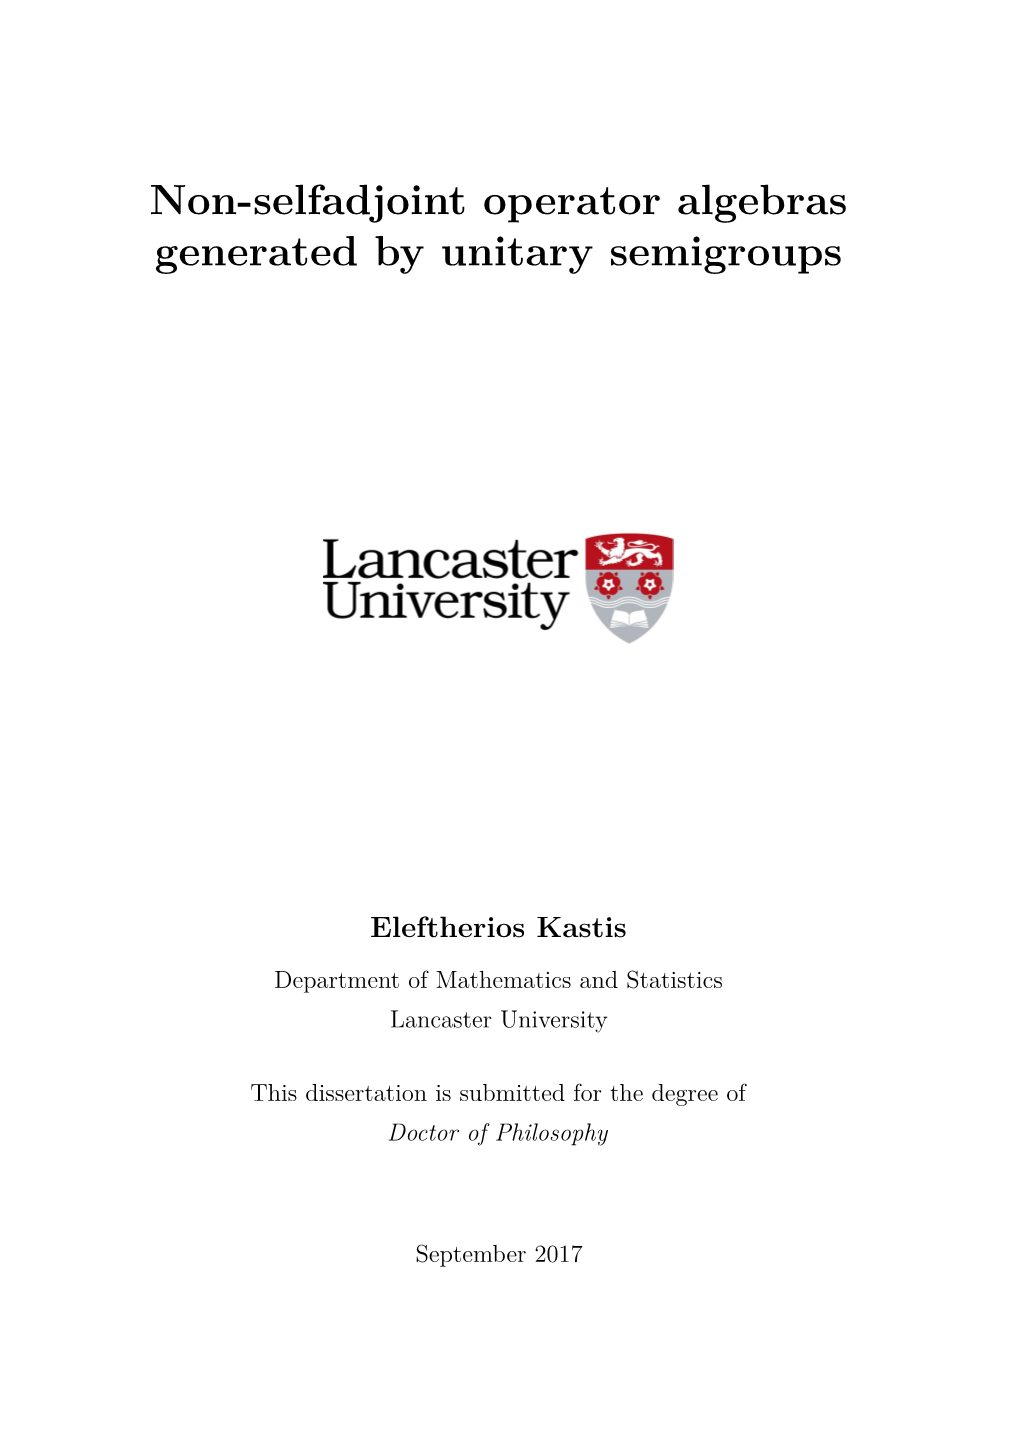 Non-Selfadjoint Operator Algebras Generated by Unitary Semigroups